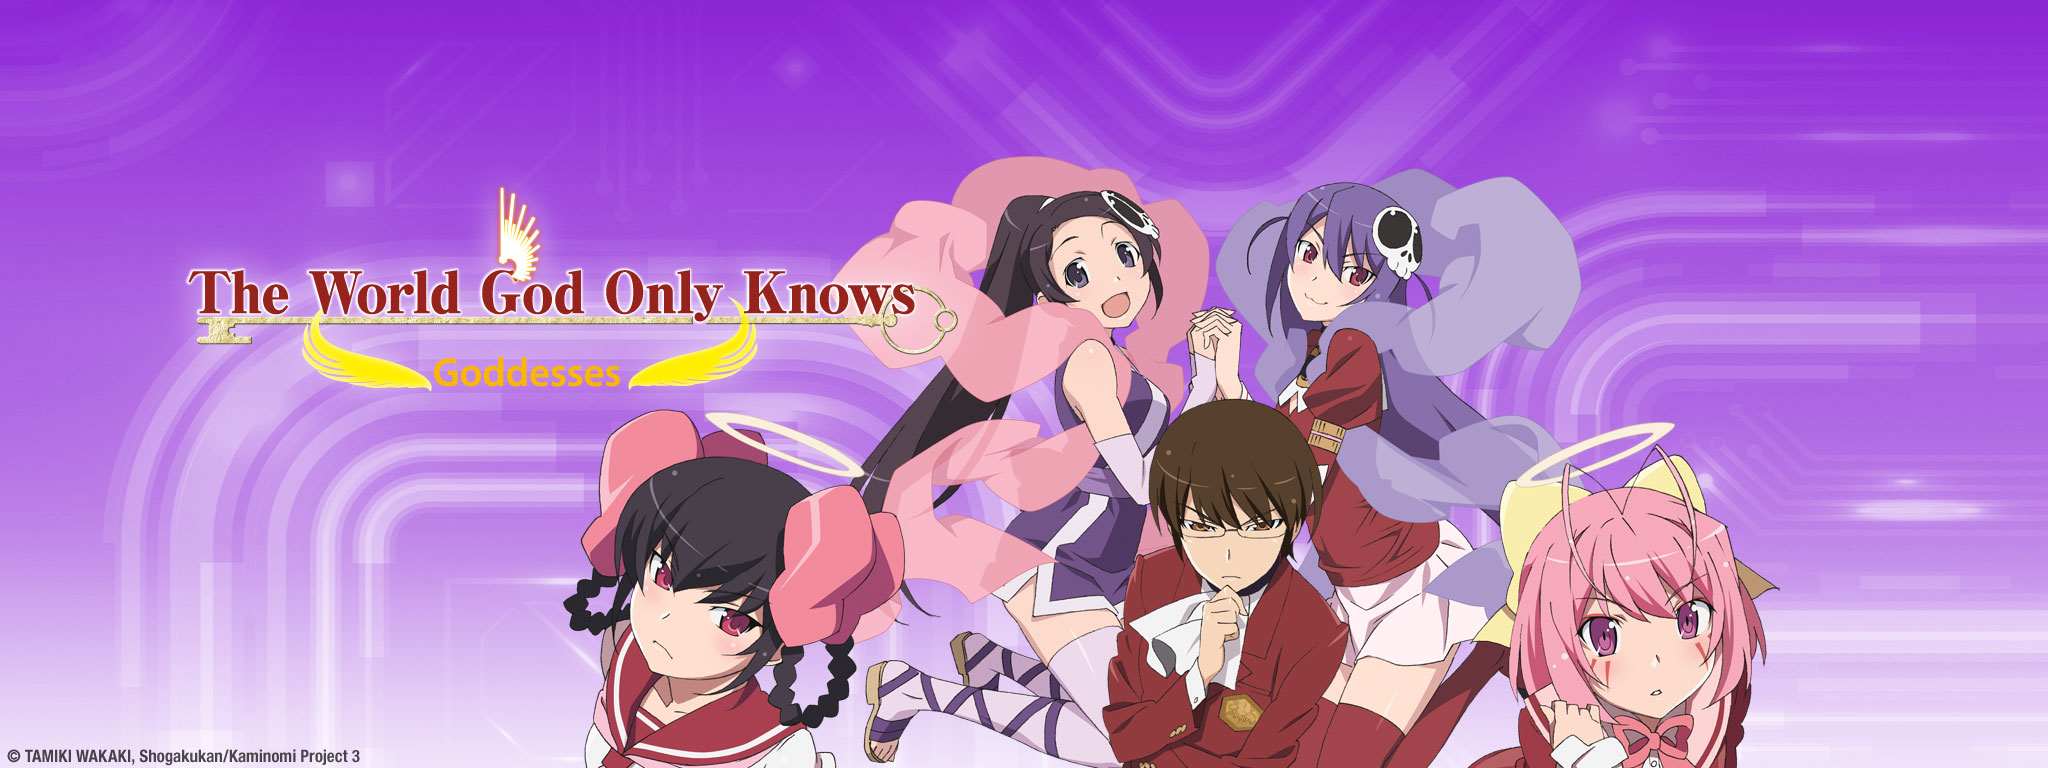 Title Art for The World God Only Knows: Goddesses